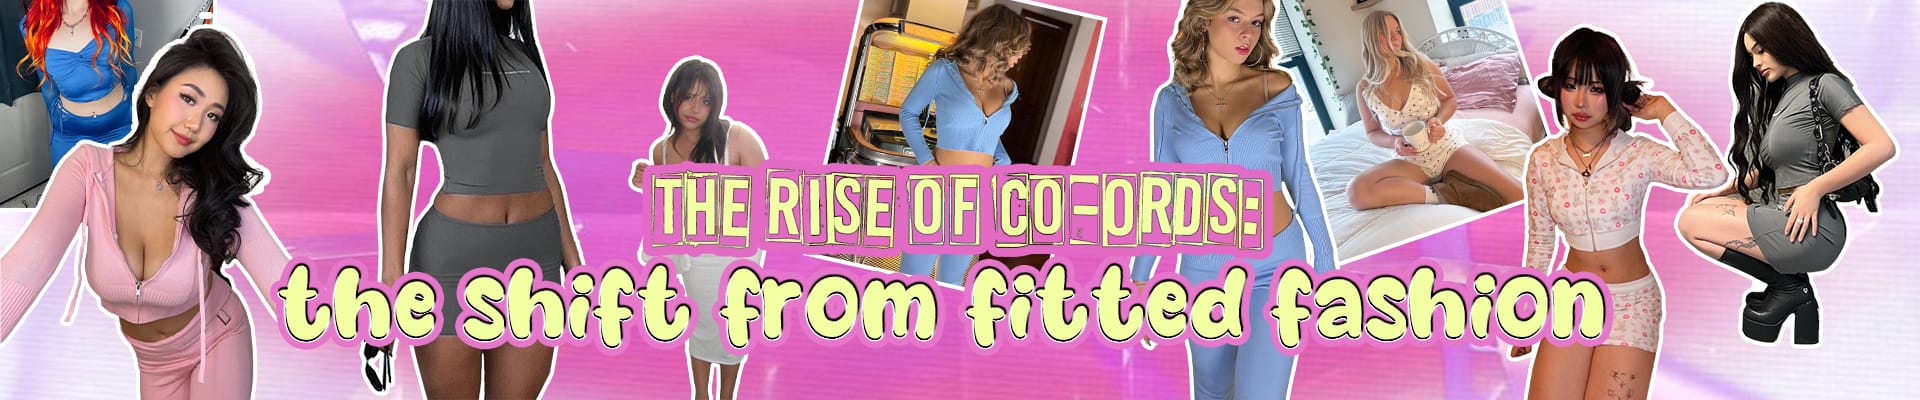 The Rise of Co-Ords: the shift from fitted fashion!